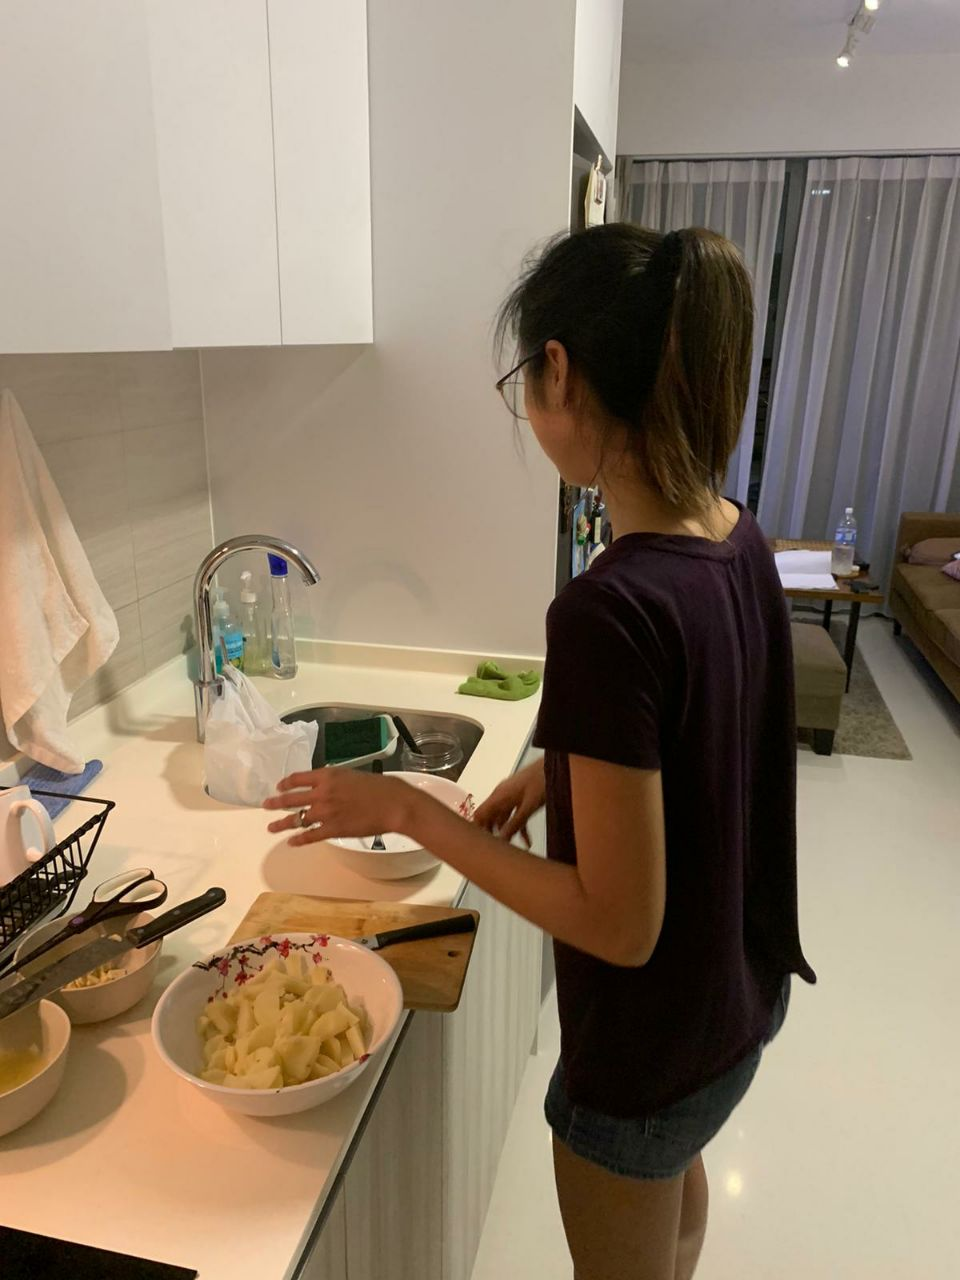 Wife cooking in the kitchen